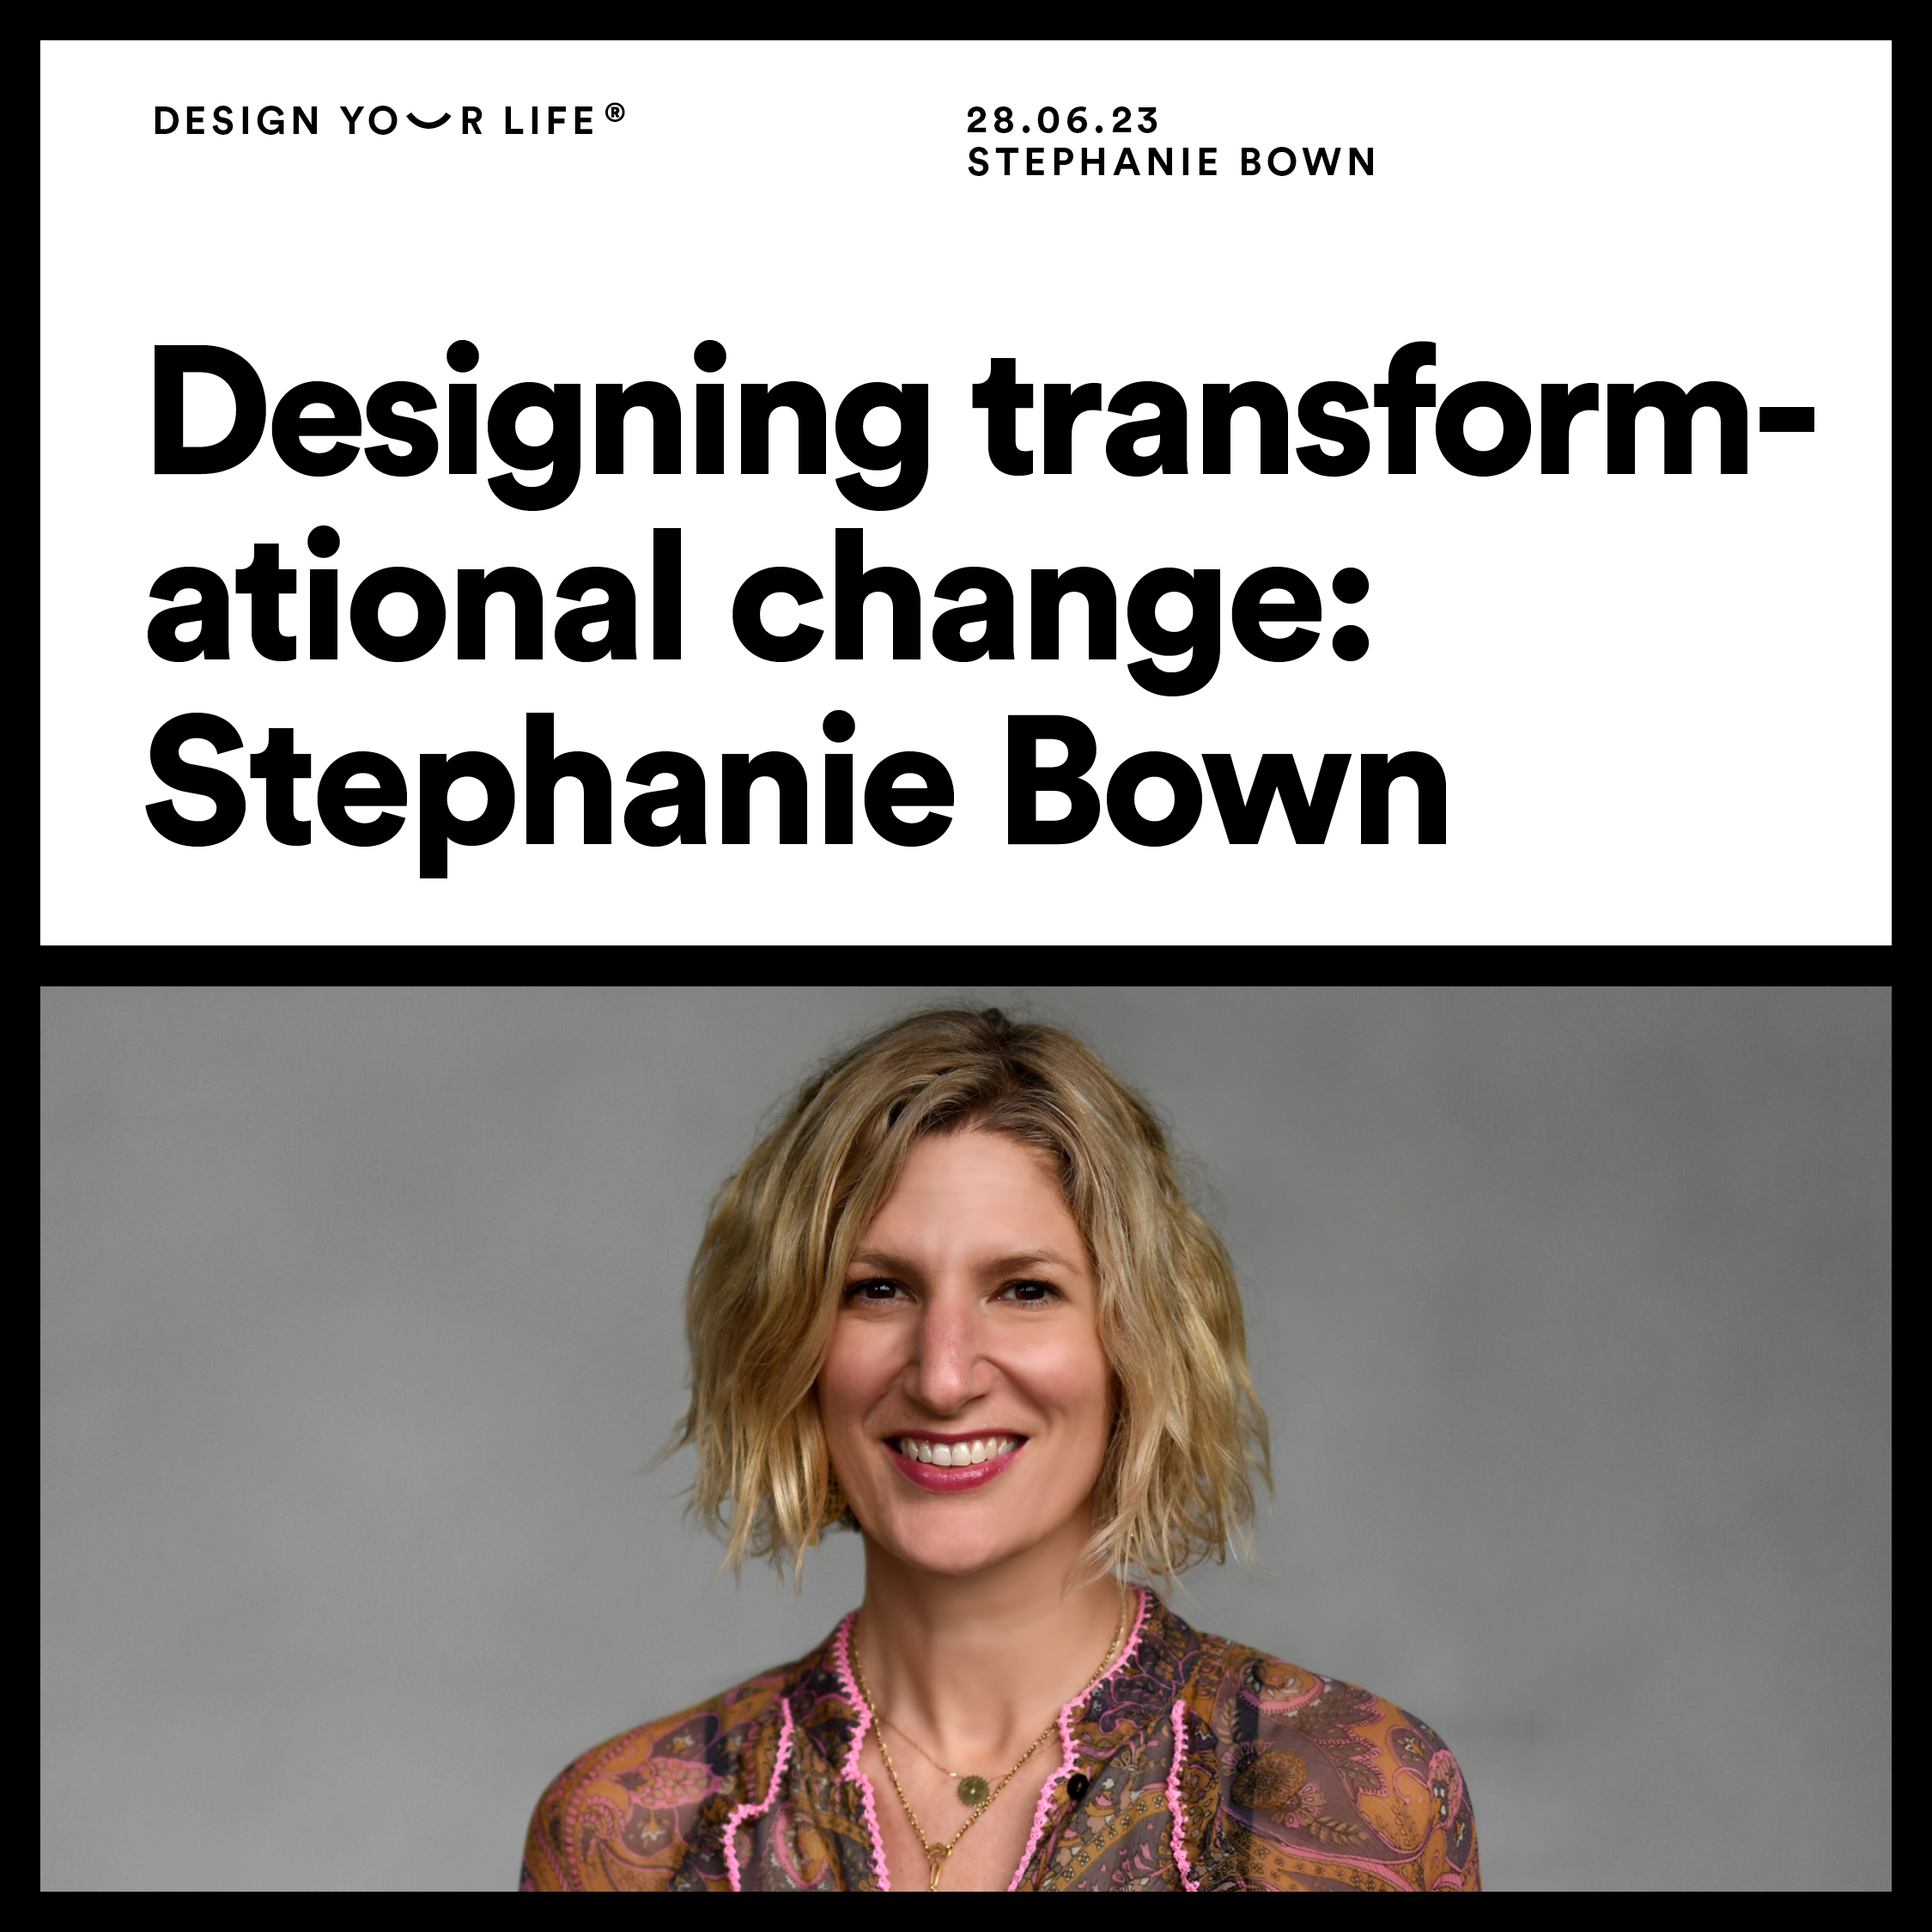 Designing transformational change with Stephanie Bown